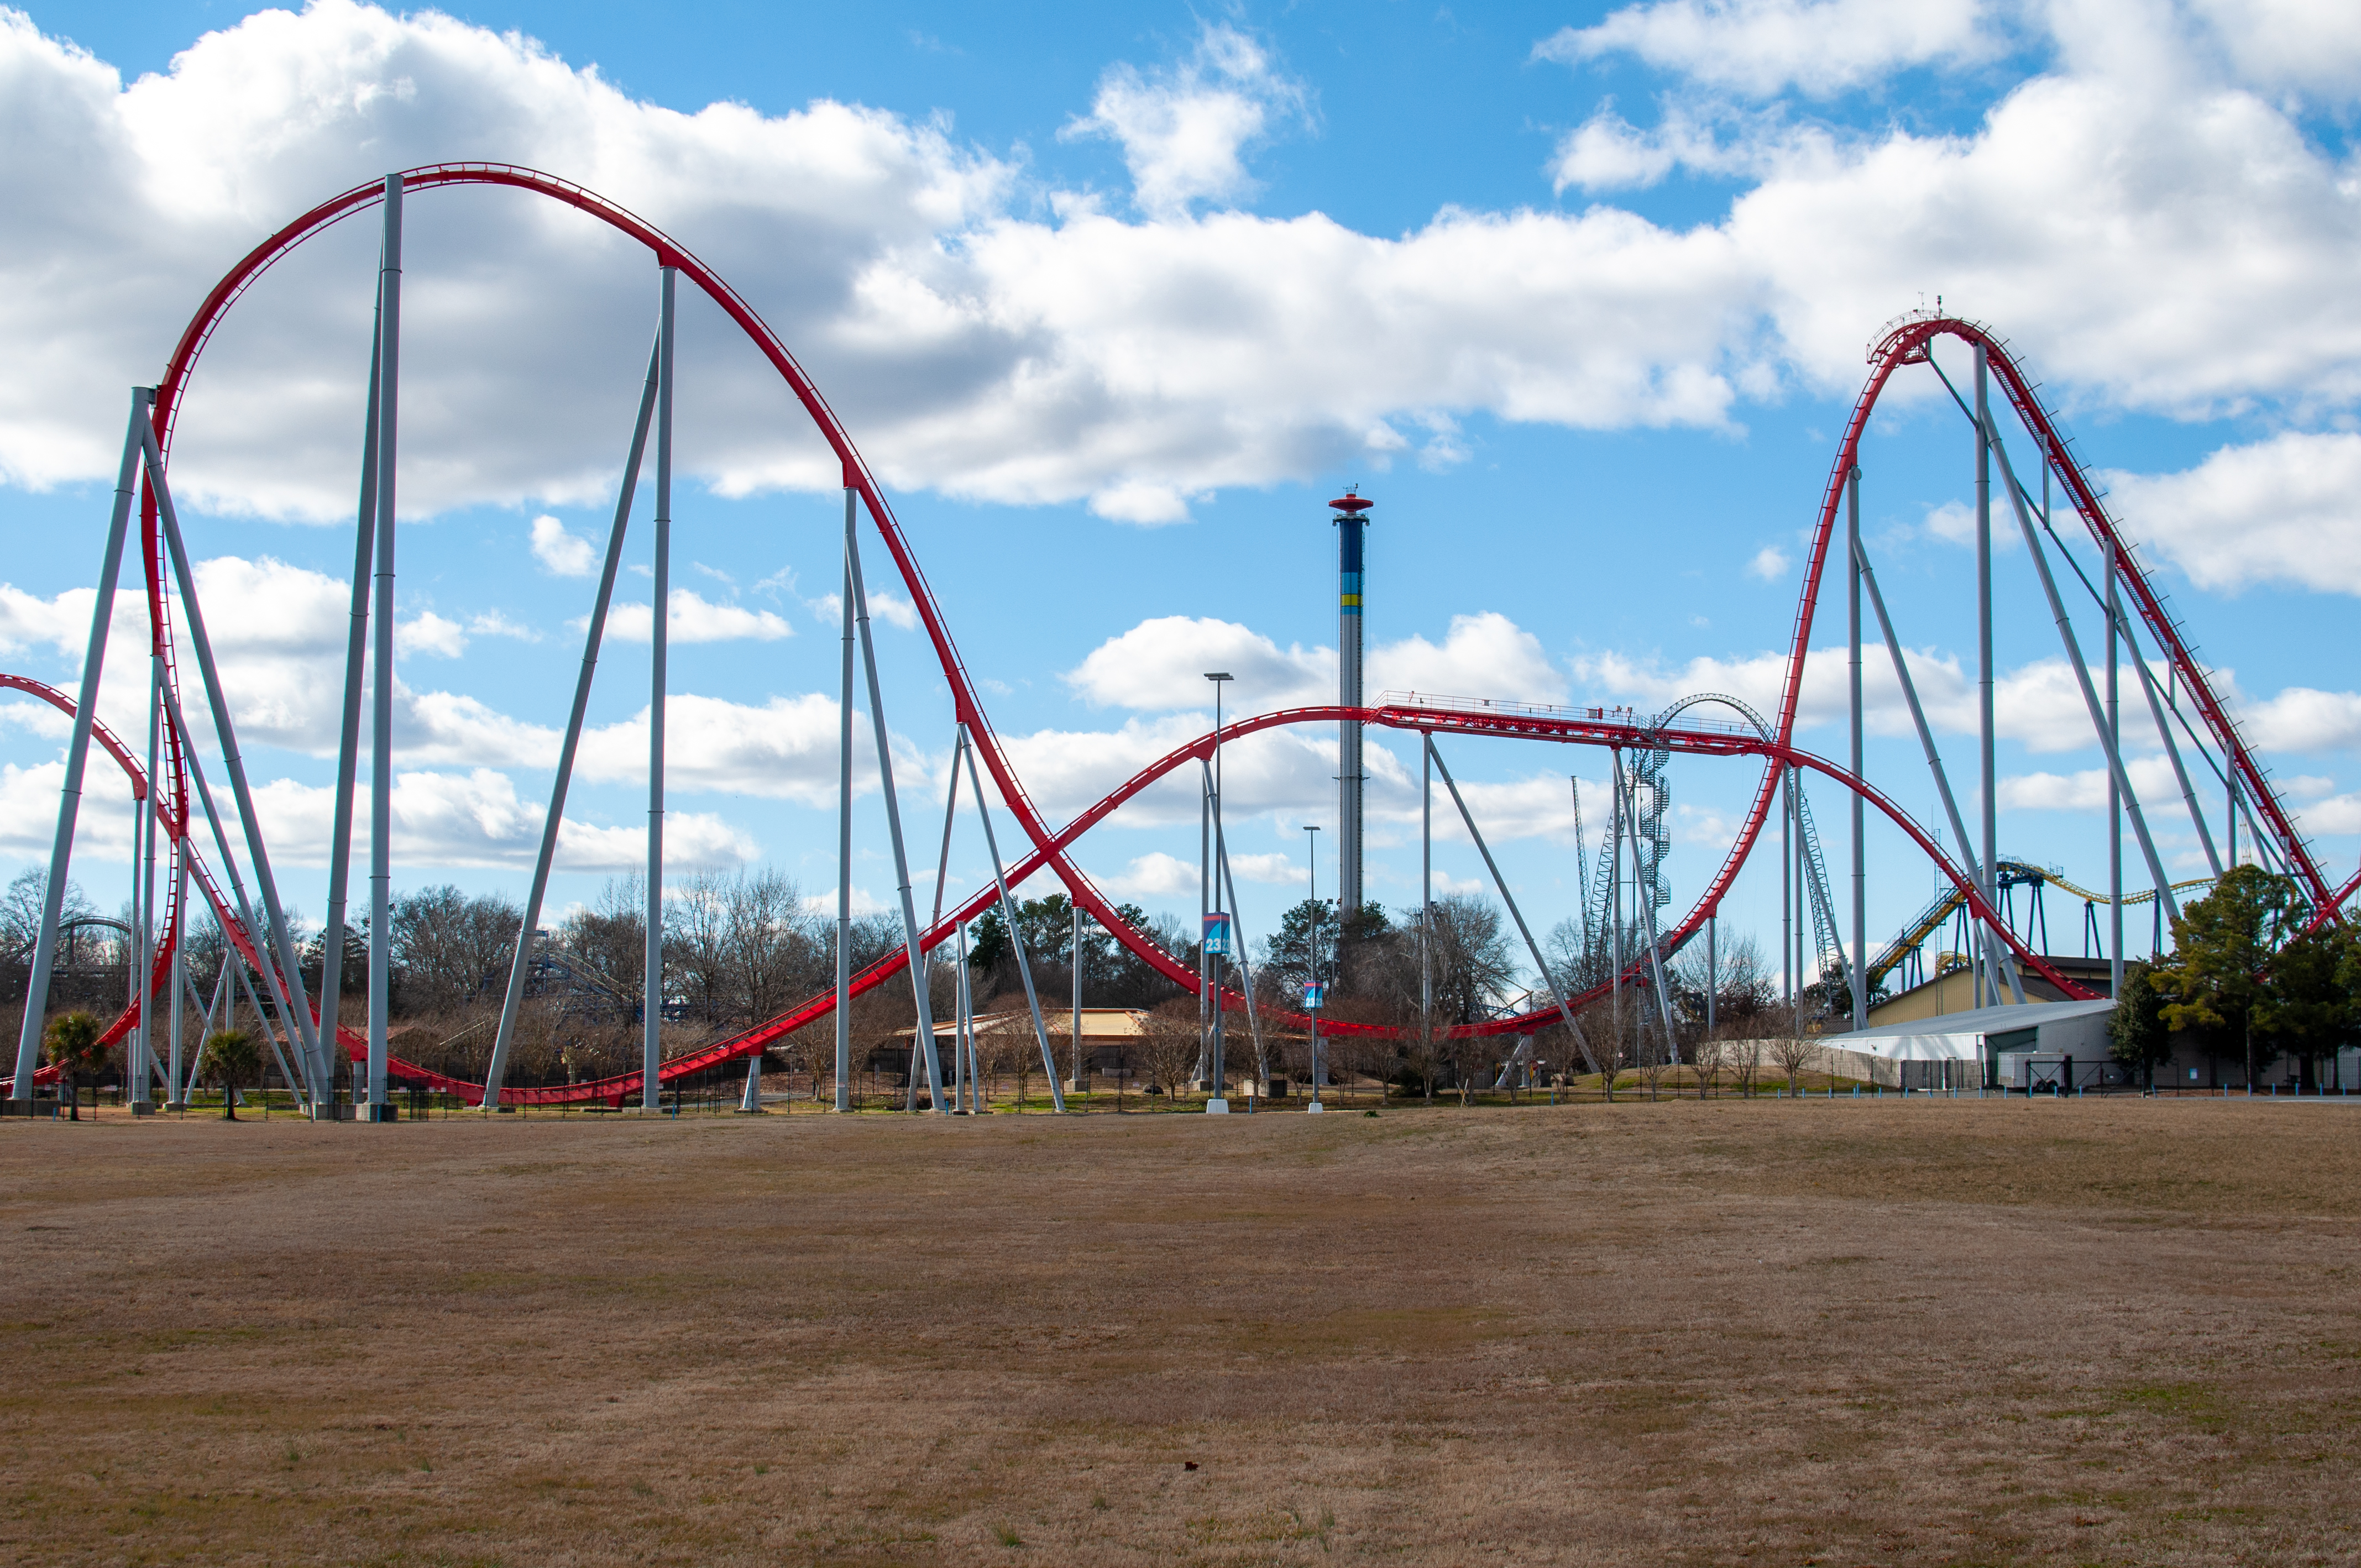 Carowinds now scheduled to reopen May 22